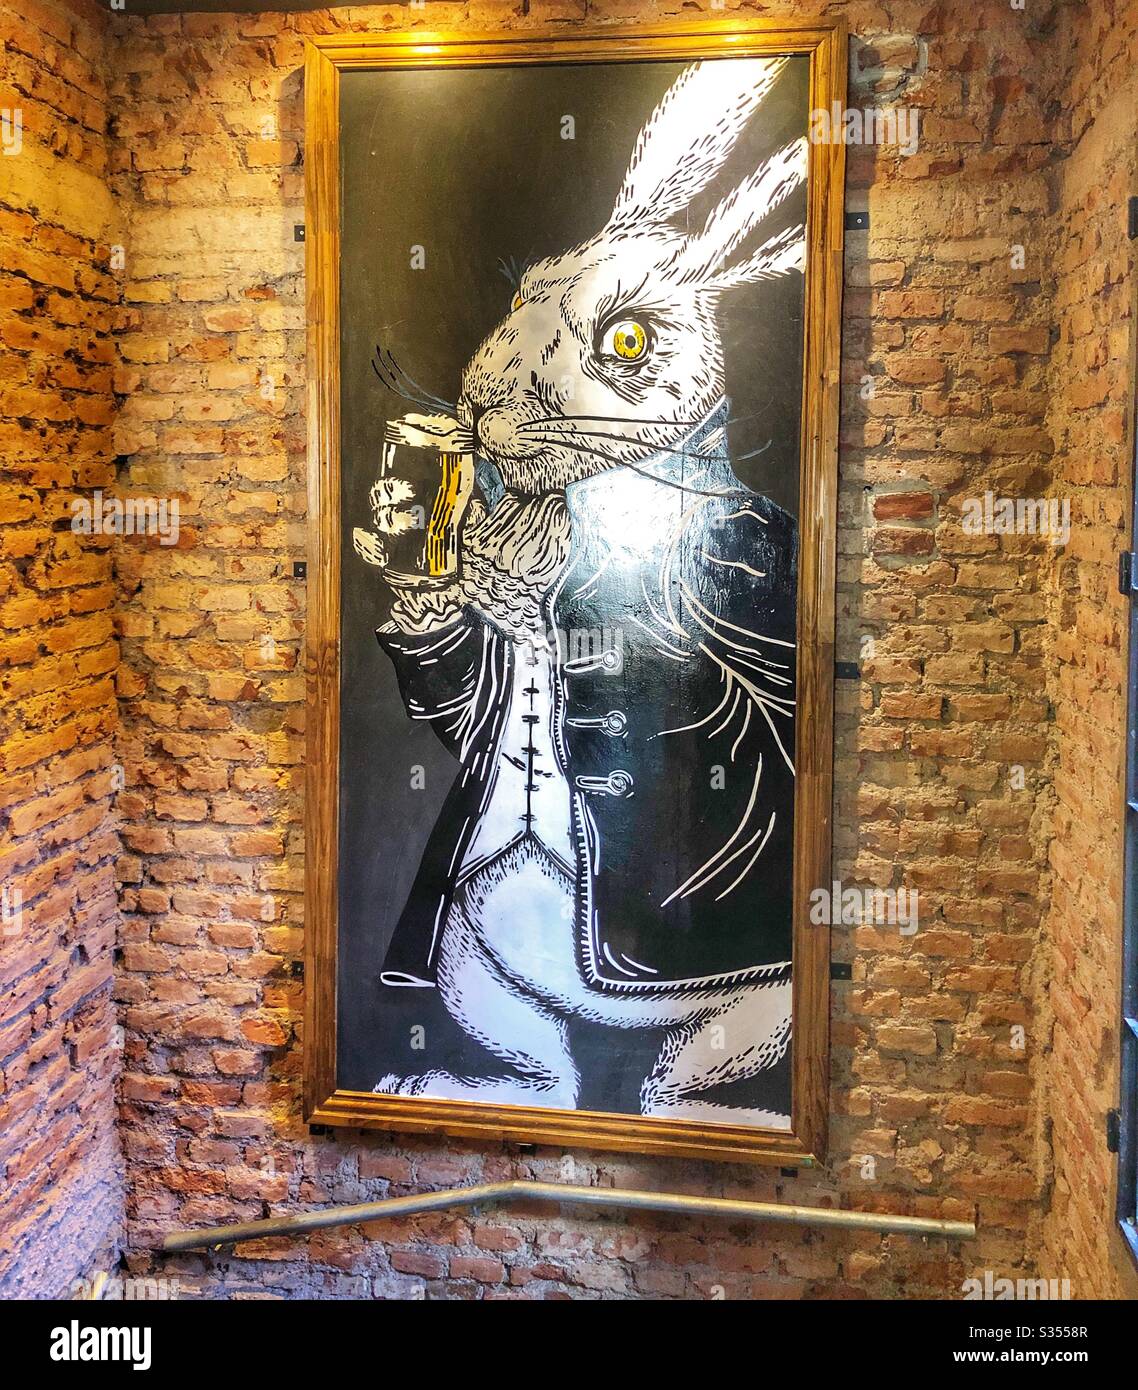 A chalkboard drawing of a rabbit drinking beer hanging on a brick wall of a restaurant. Stock Photo